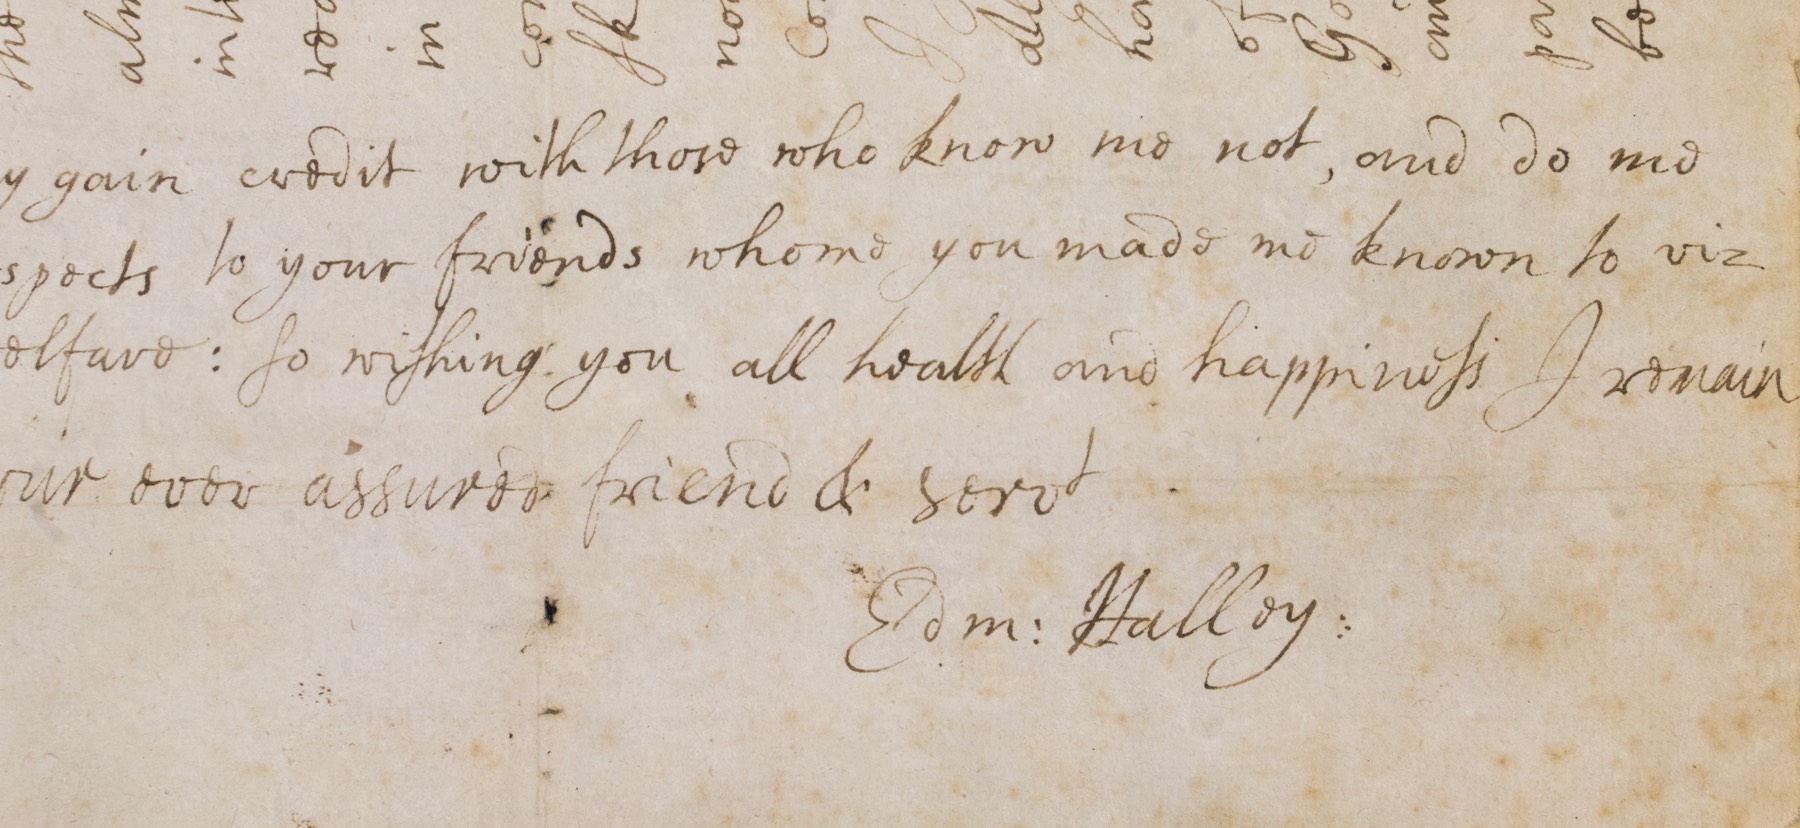 Photo of a letter written by Edmond Halley